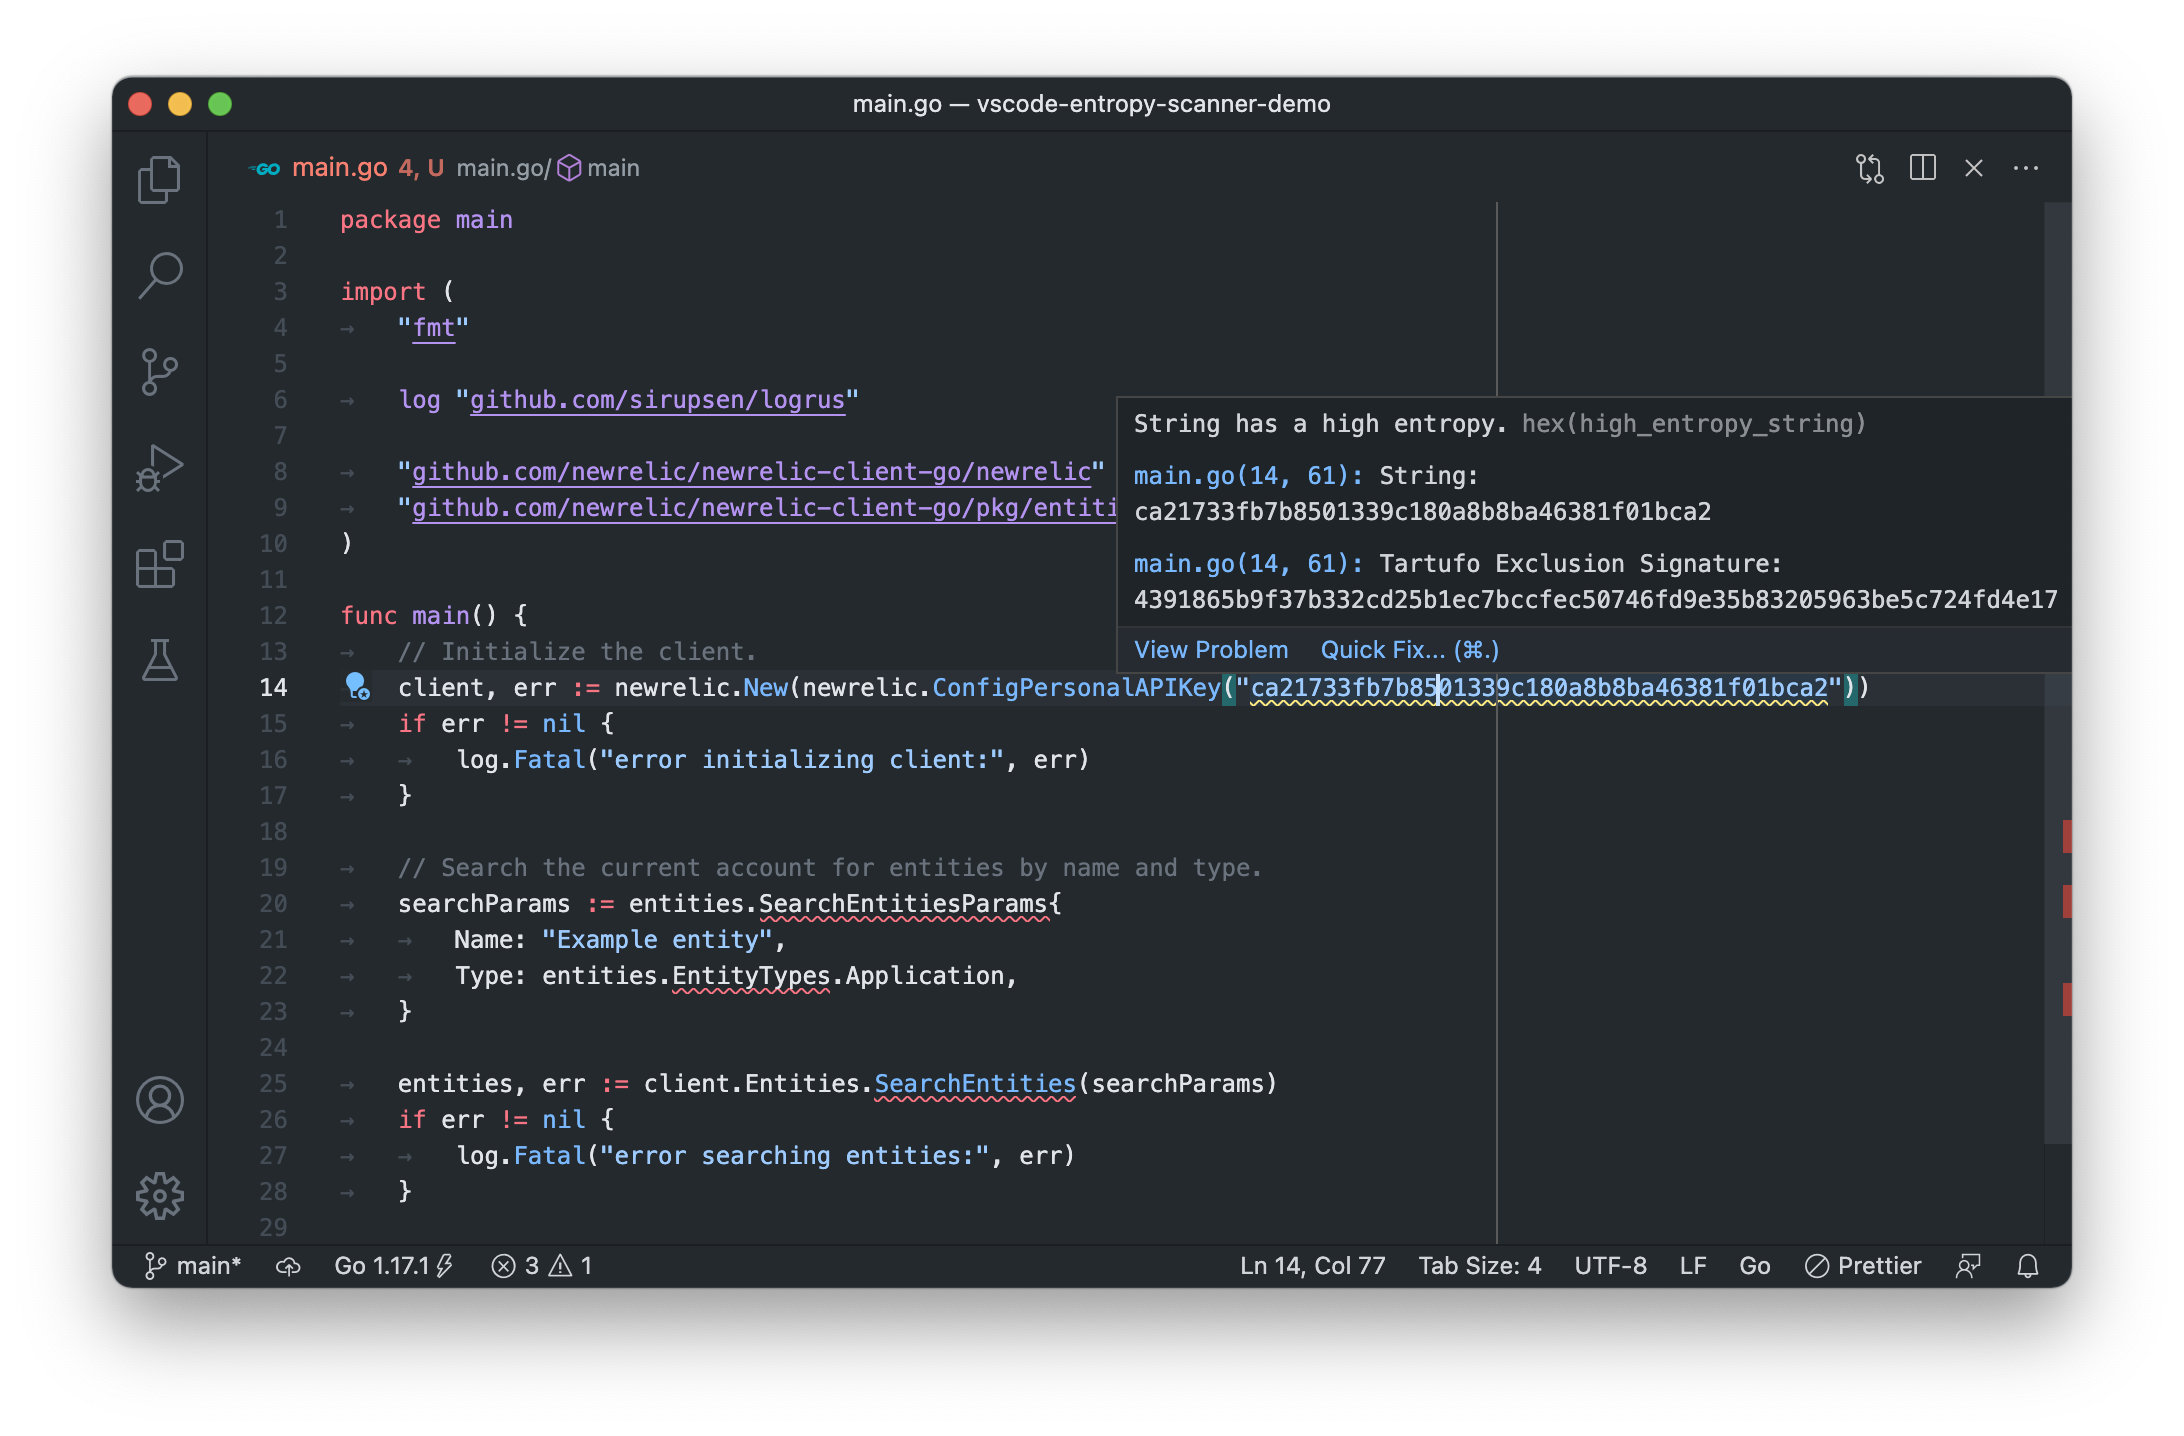 Screenshot of the Visual Studio Code extension in action